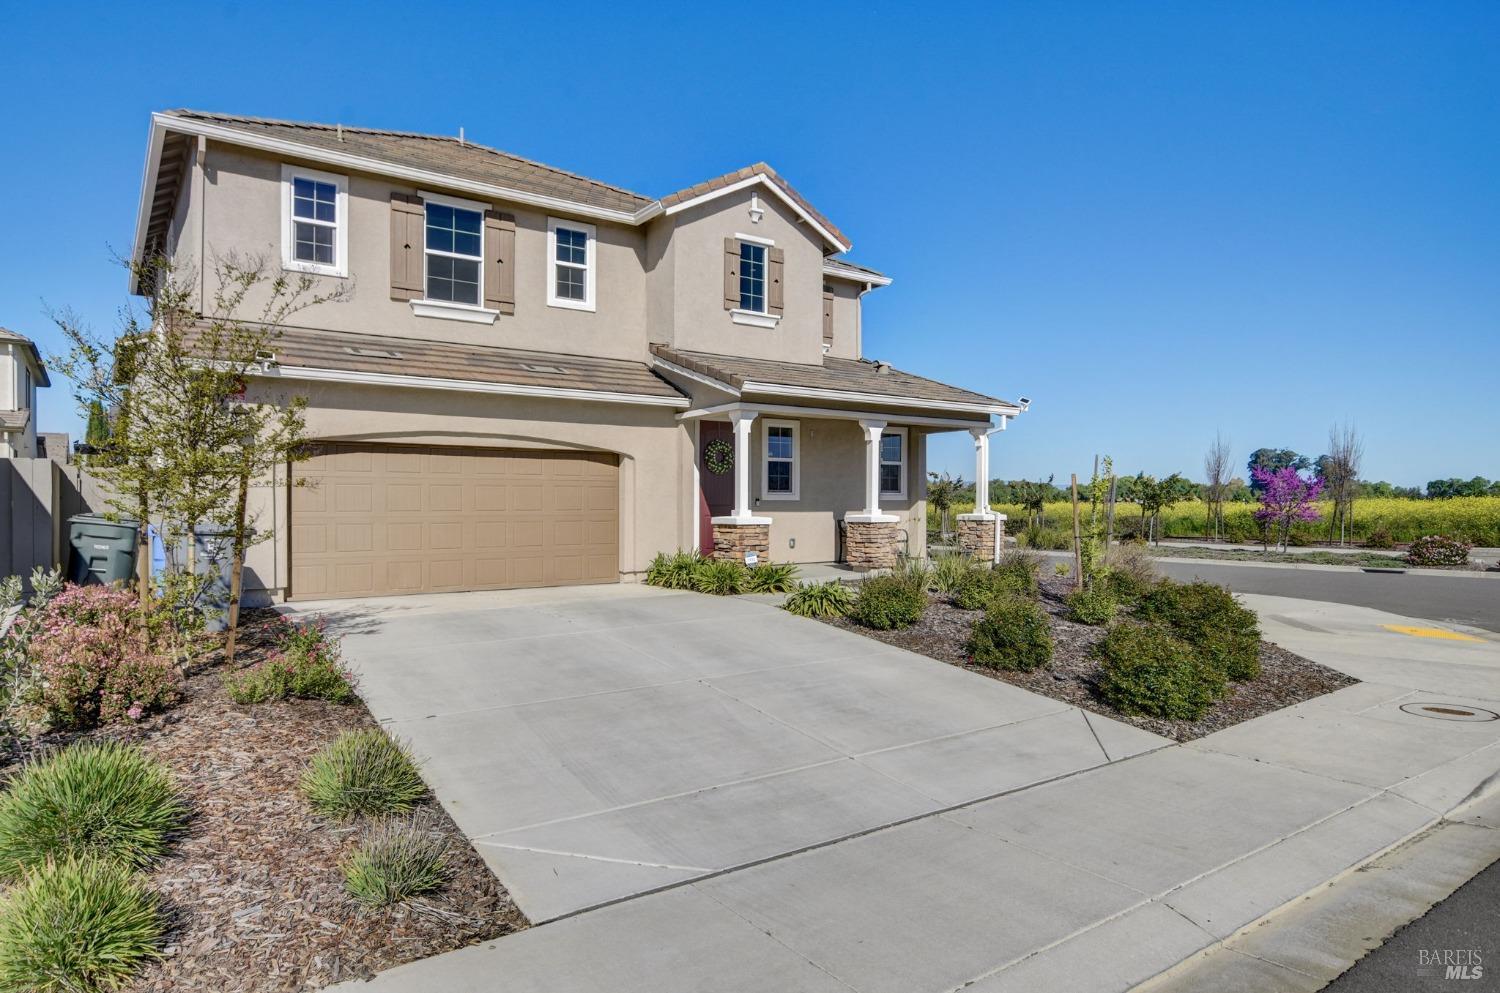 Photo of 200 Lantana Dr in Vacaville, CA